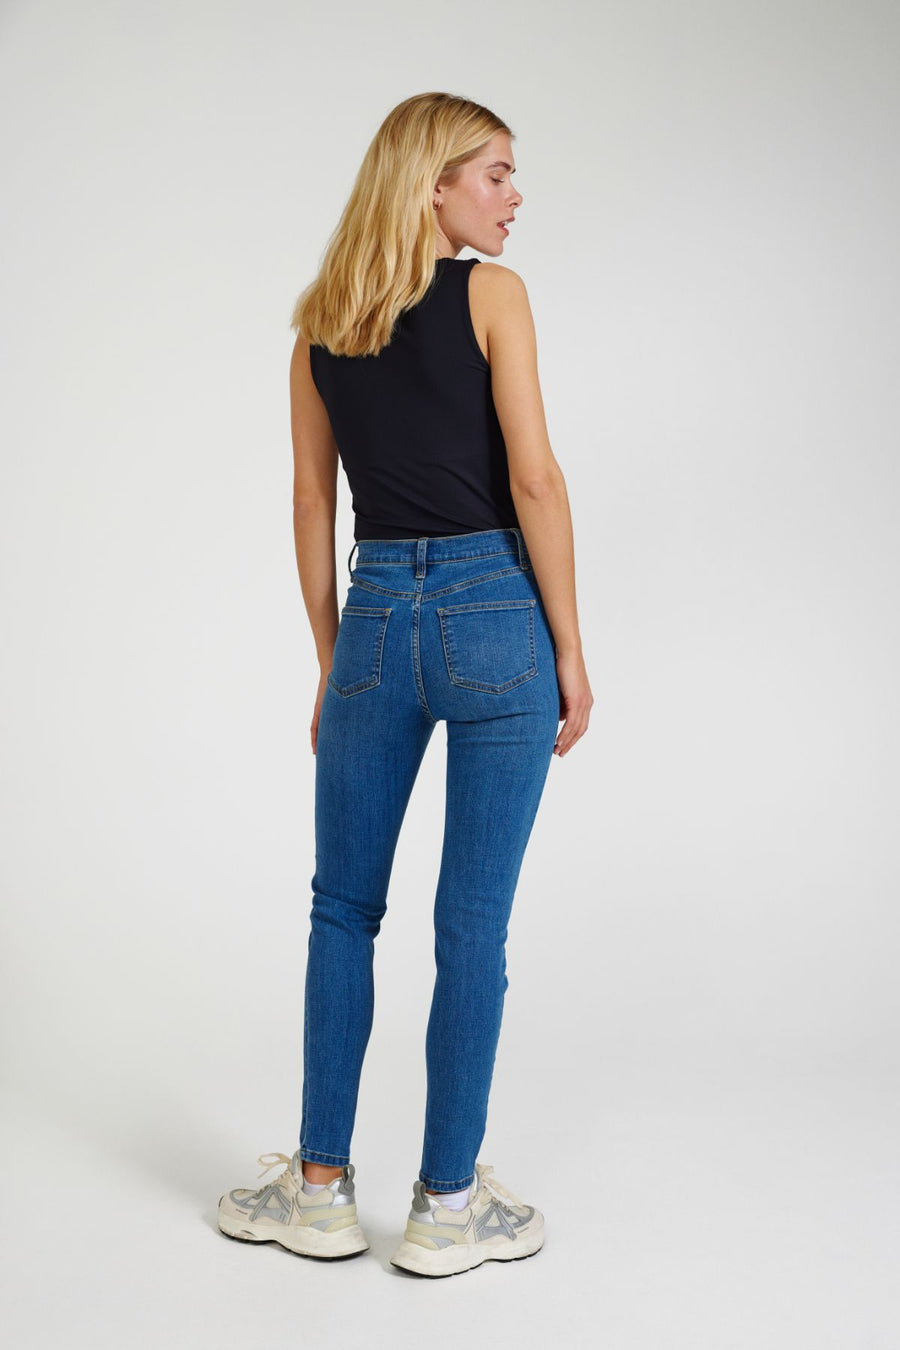 FQHARLOW - JEANS WITH TIGHT FIT - BLUE